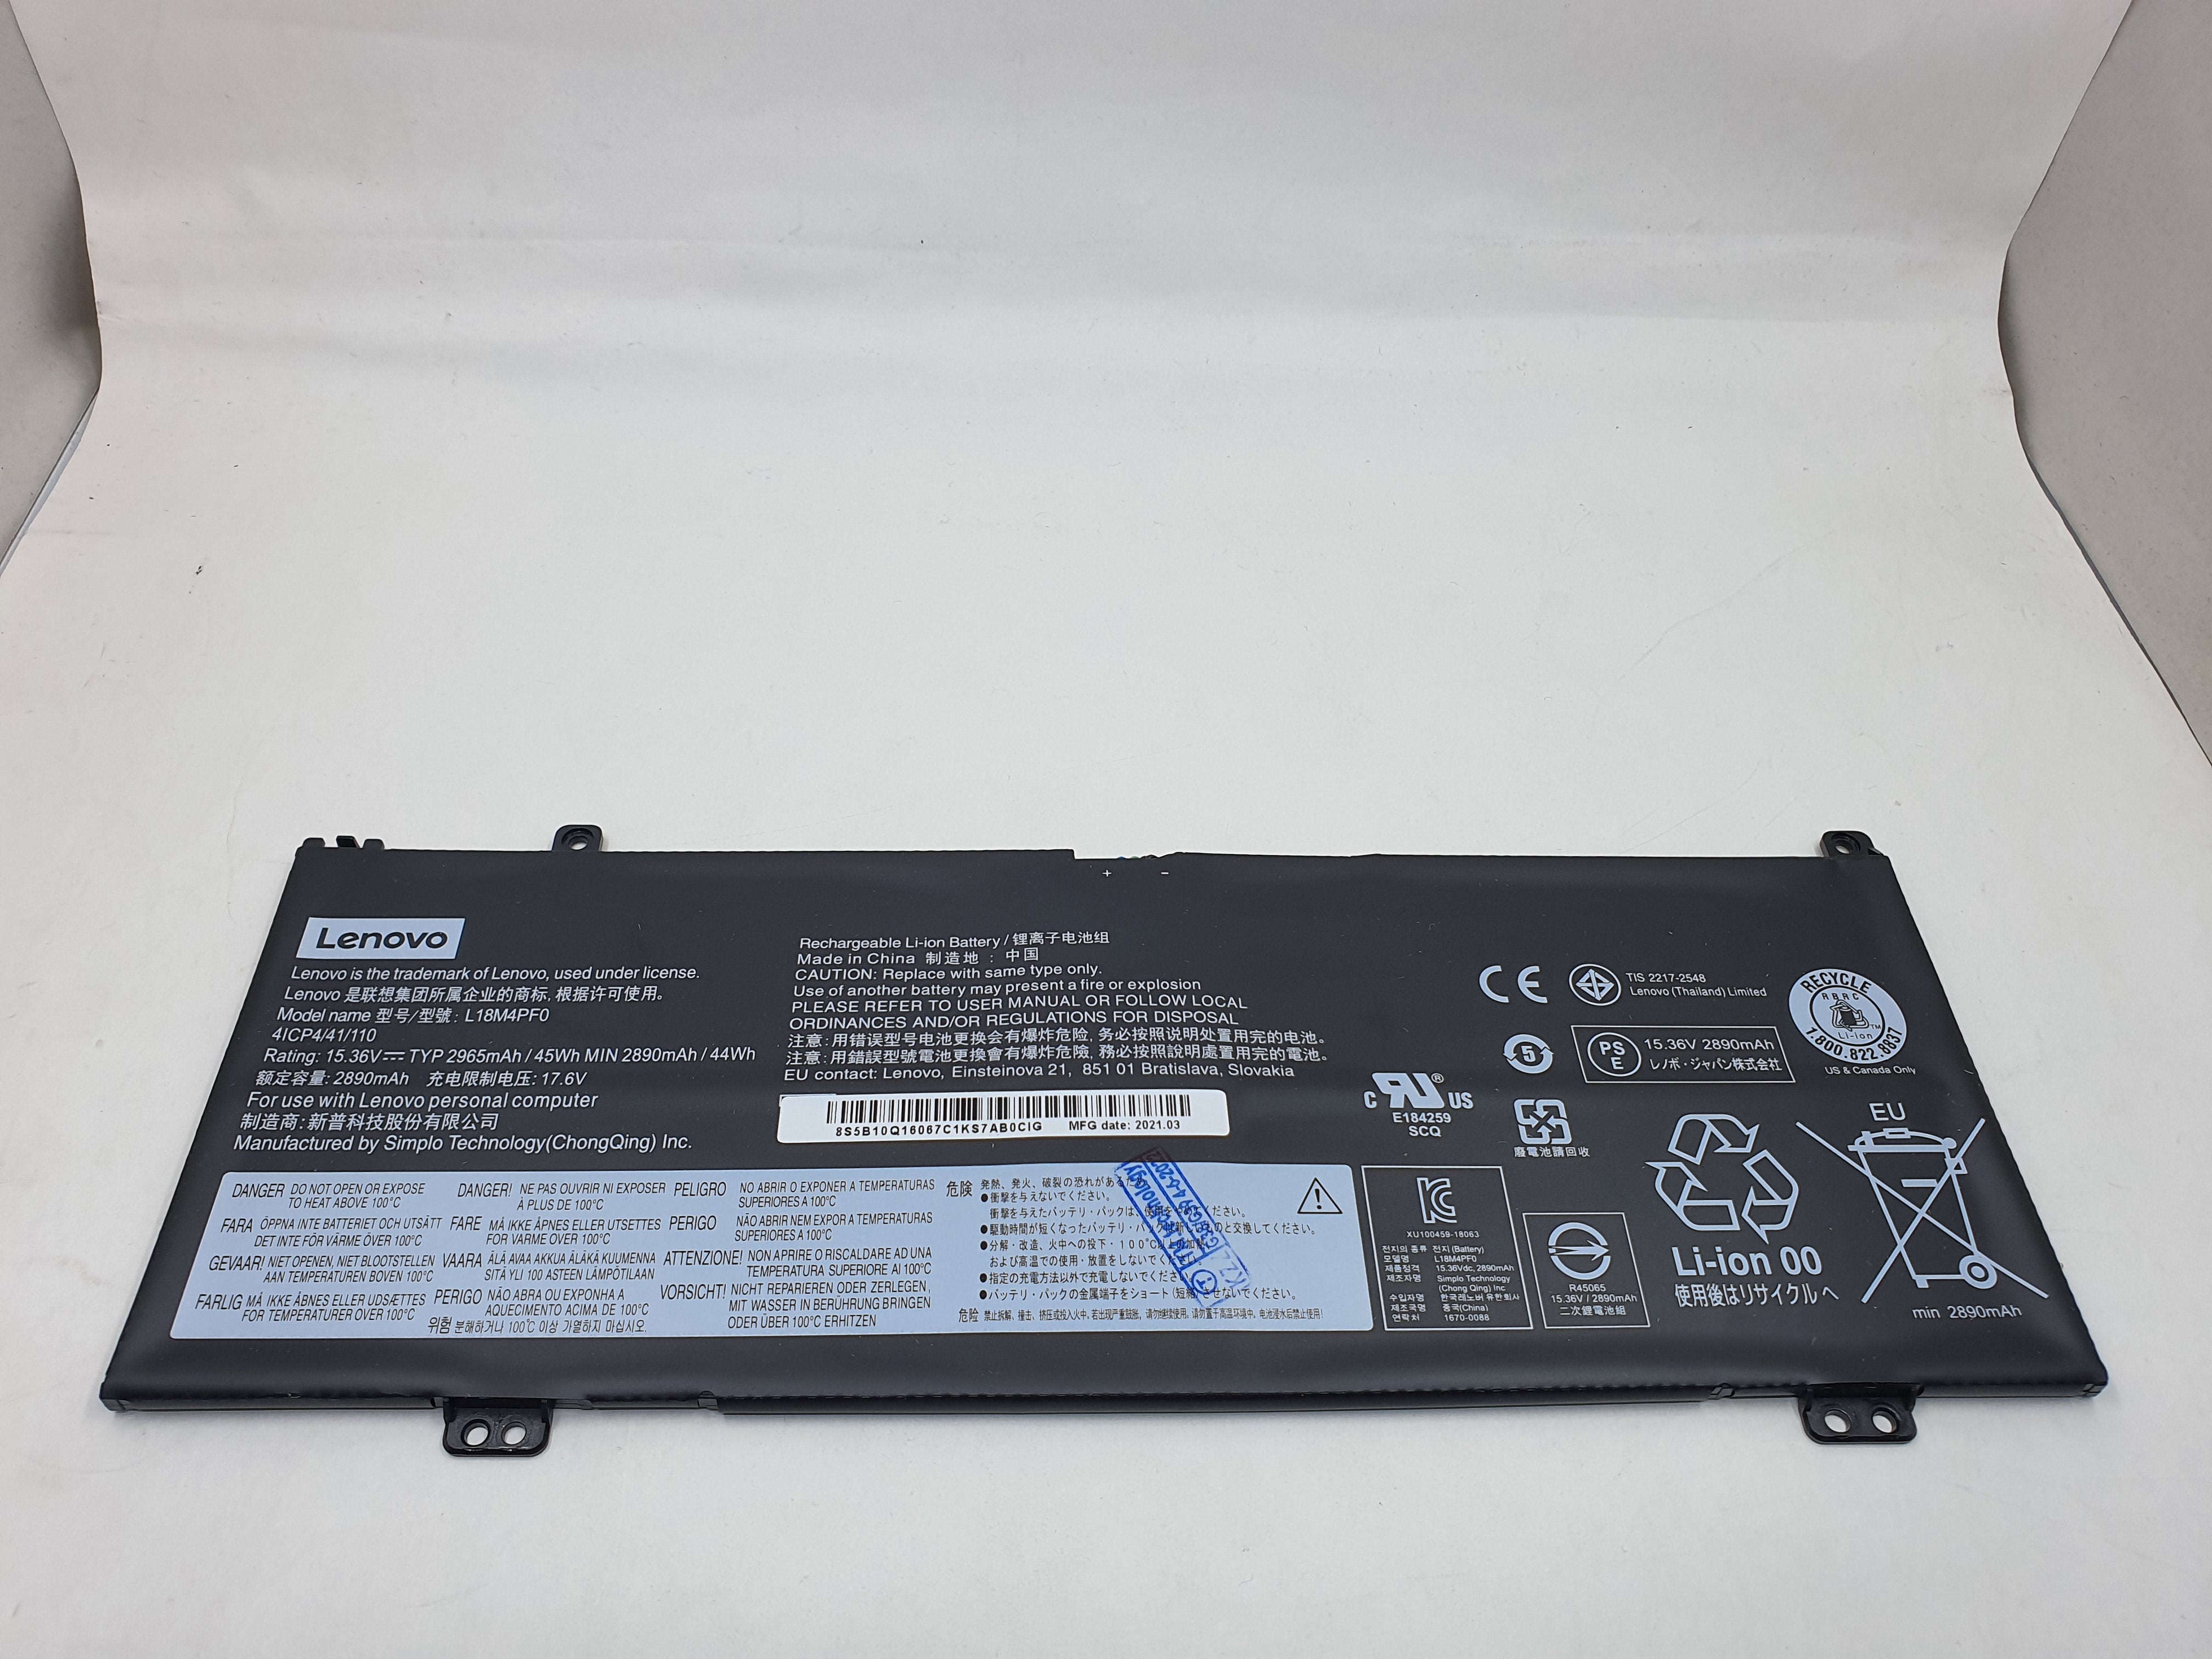 Lenovo Battery ThinkBook 13S-IWL A1 for Replacement - Lenovo ThinkBook 13S-IWL